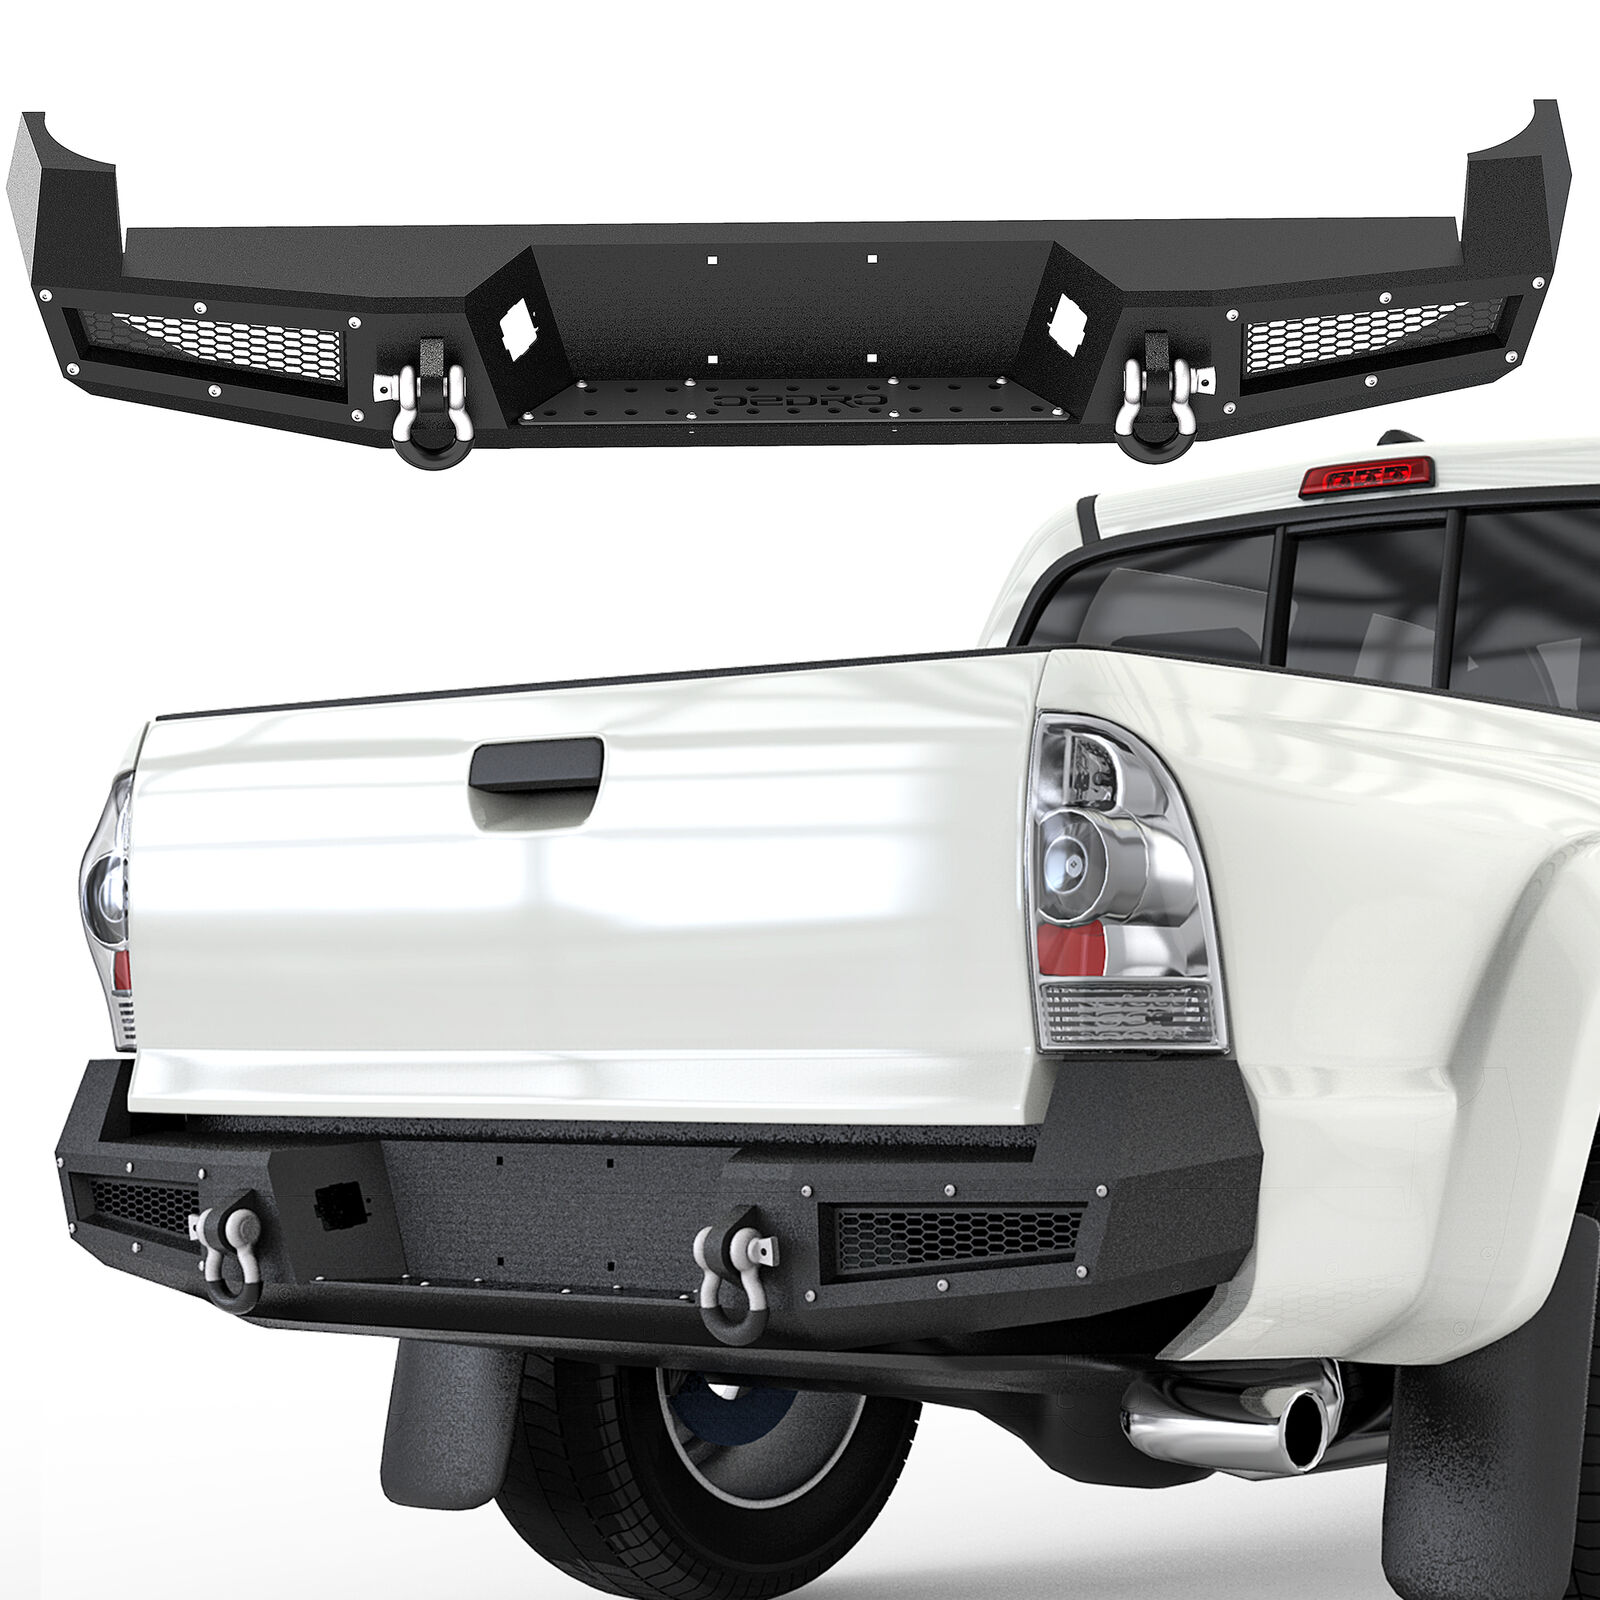 OEDRO Textured Rear Bumper for 2005-2015 Toyota Tacoma w/ License Plate Hole